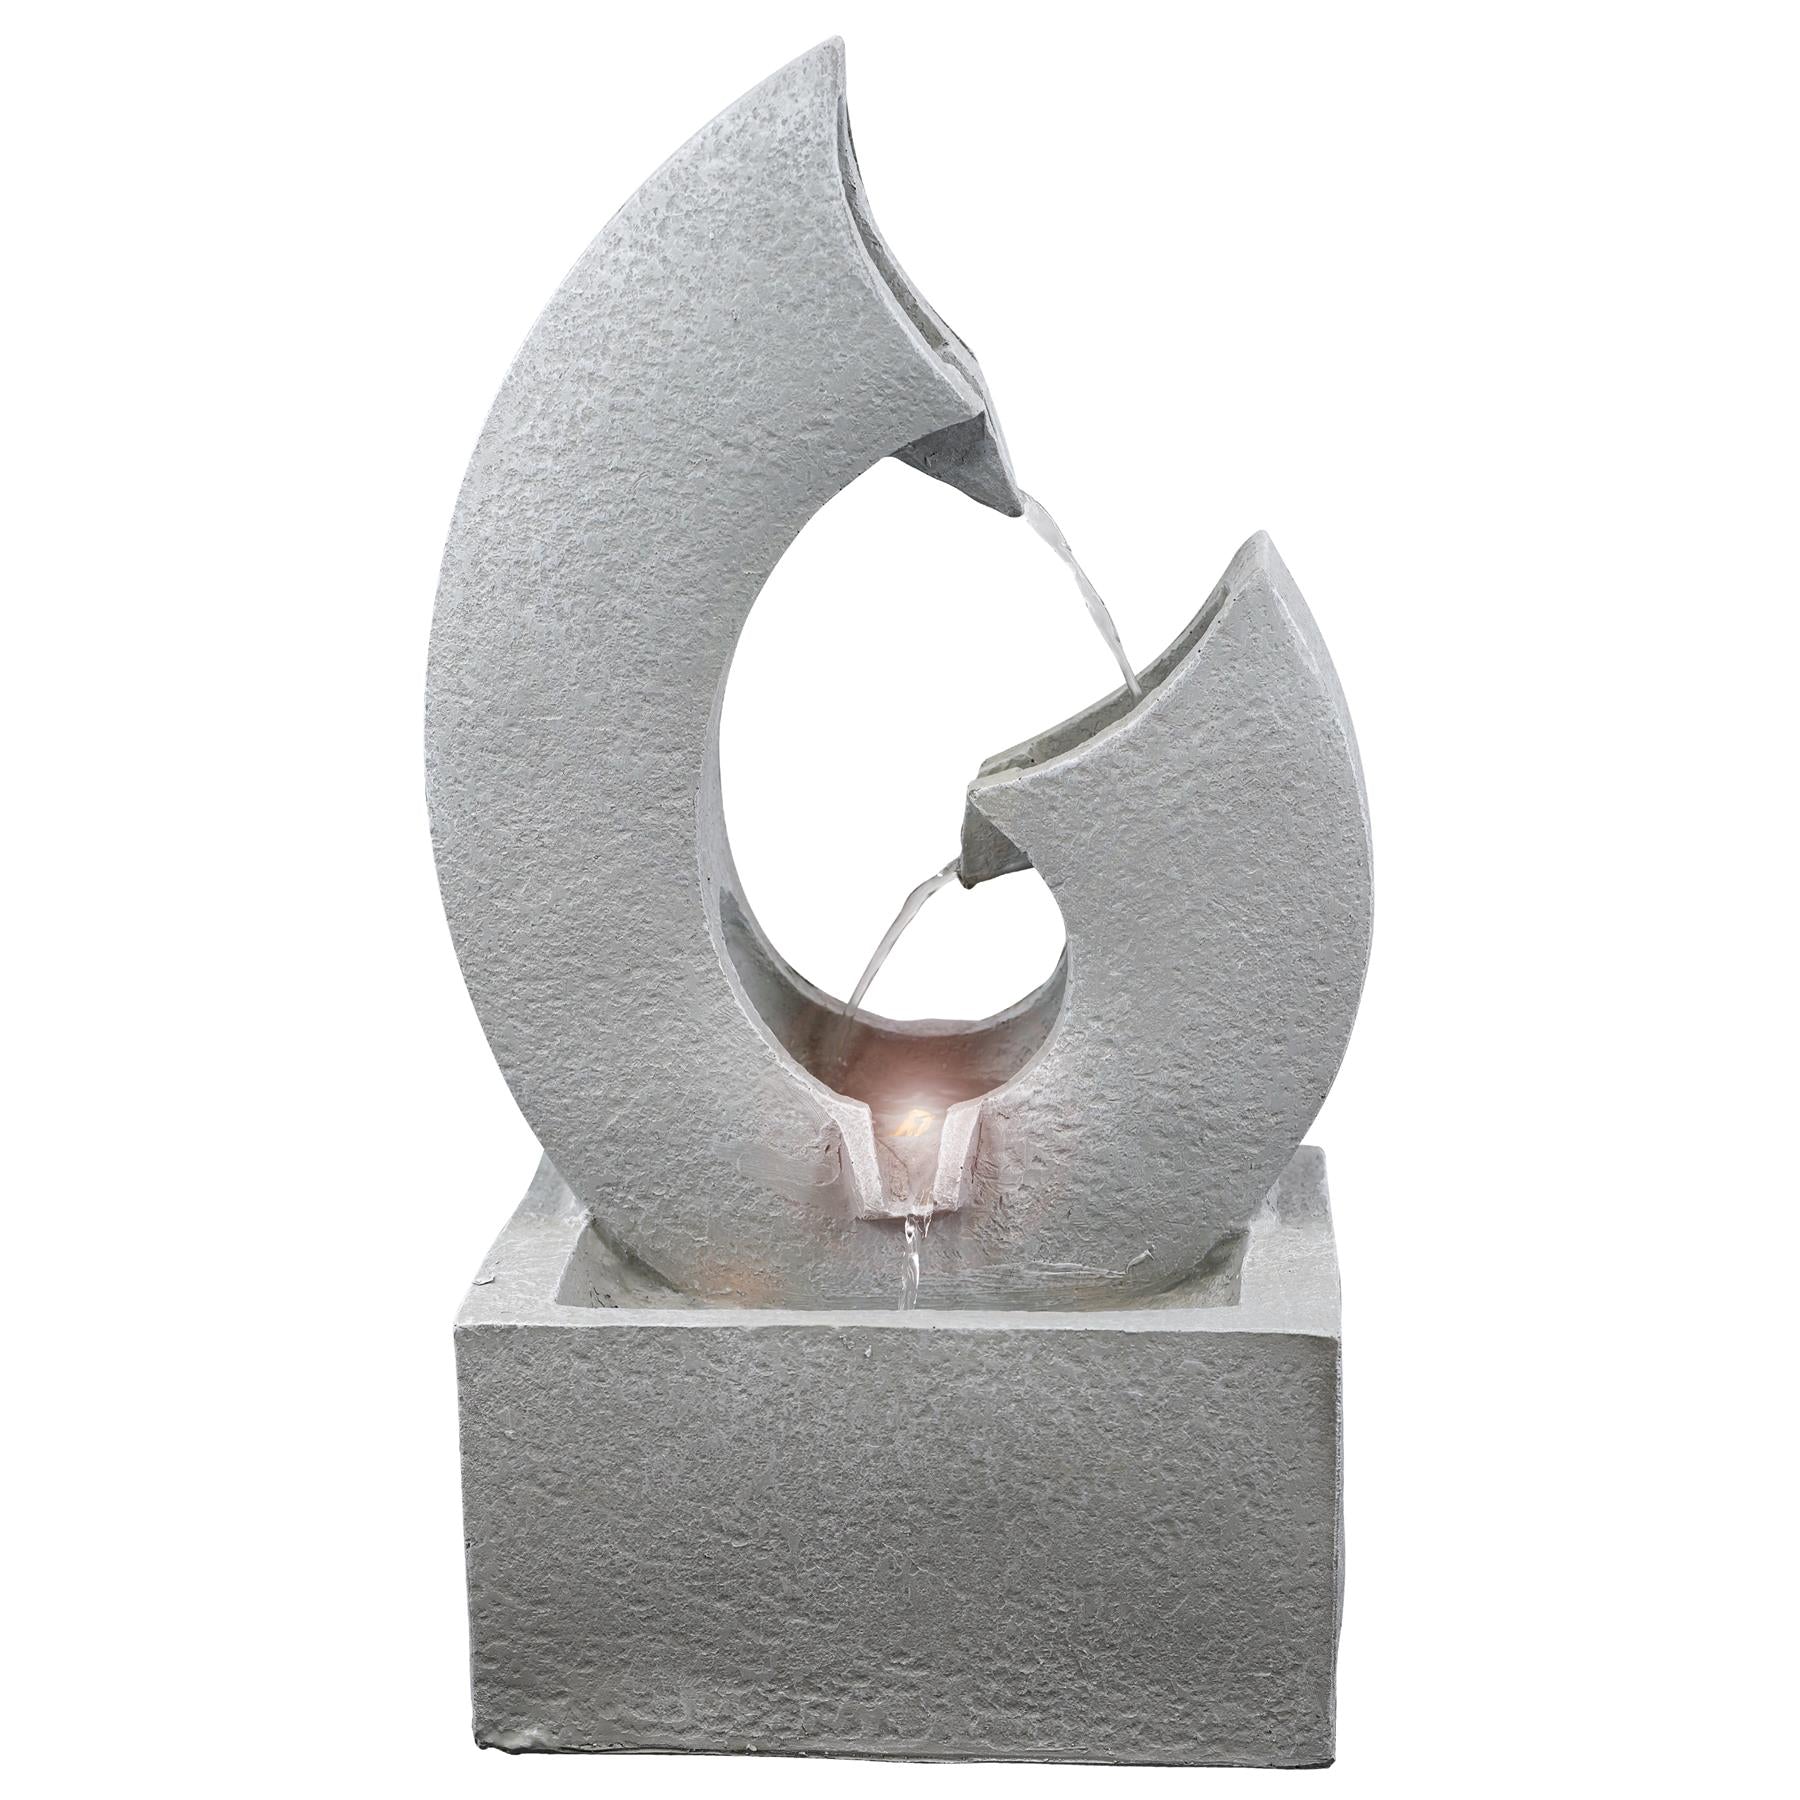 Horn Water Feature With Led Lights by GEEZY - UKBuyZone